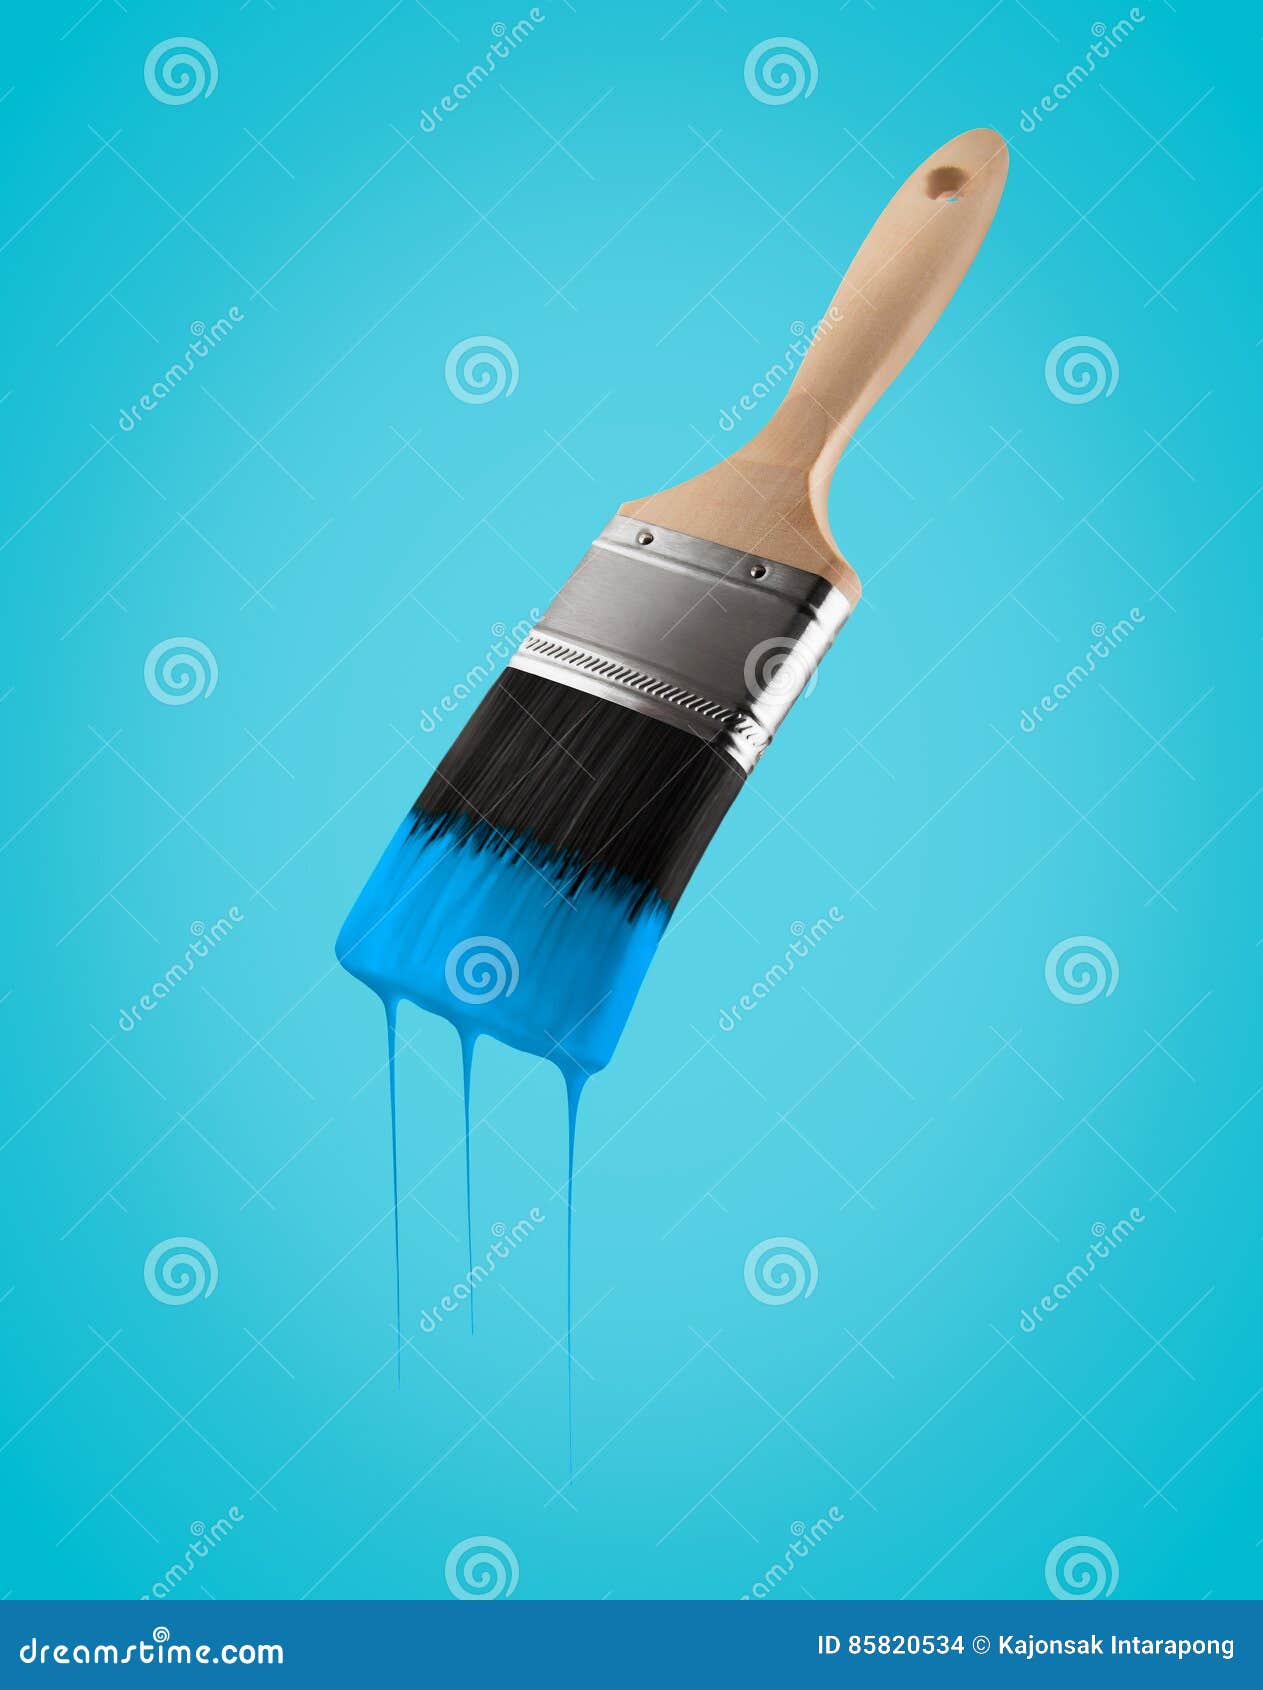 Paintbrushes Dripping into Paint Containers Stock Photo by ©ginosphotos1  18416747